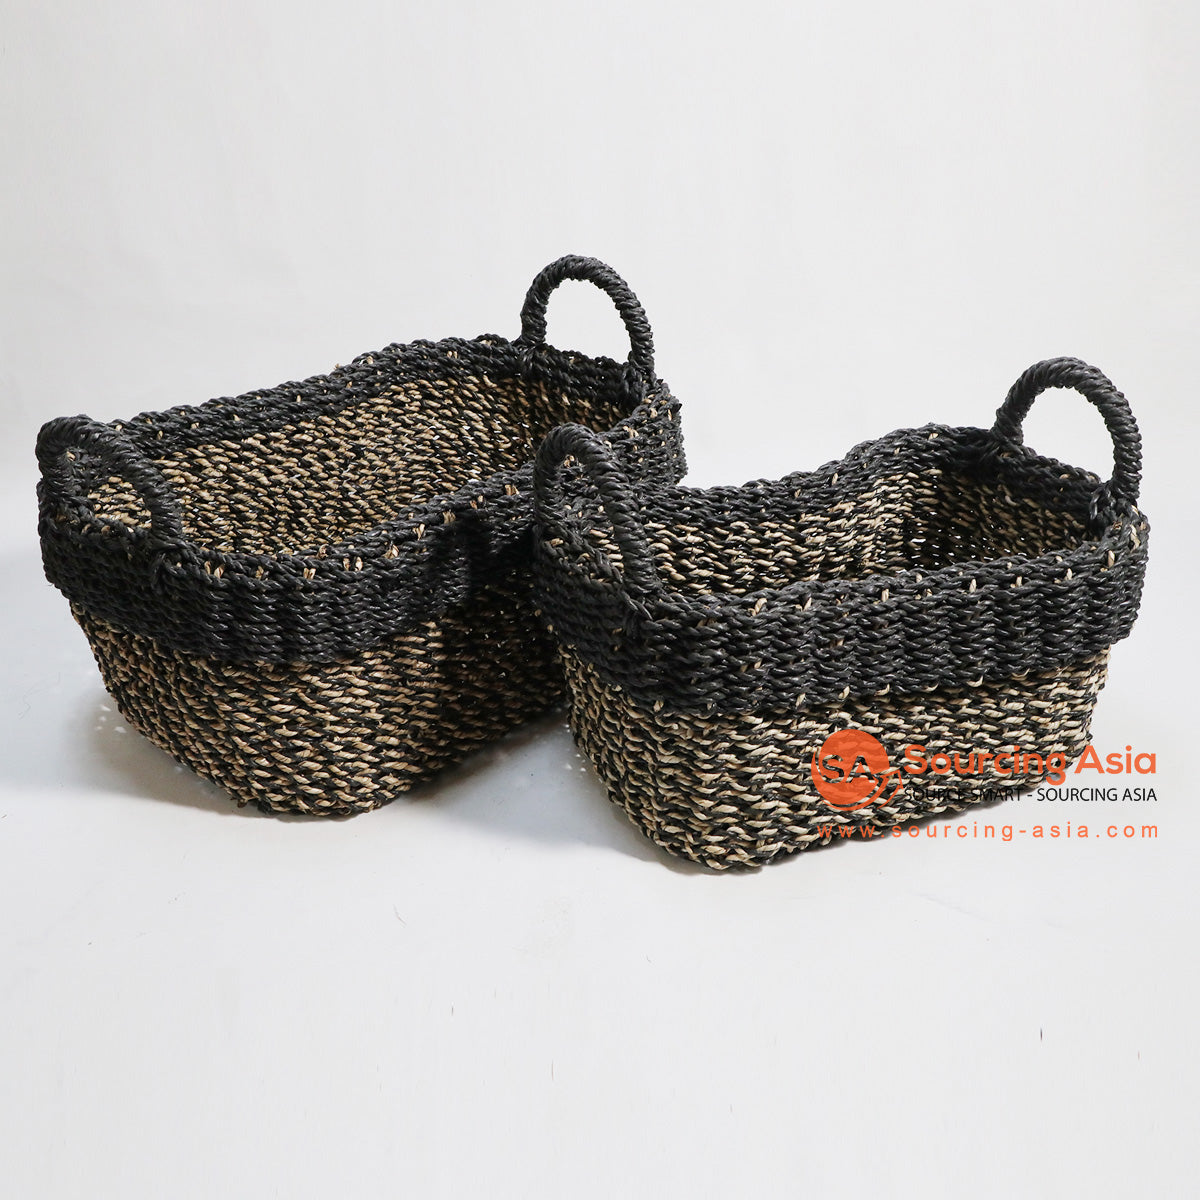 HBSC134 SET OF TWO NATURAL AND BLACK SEAGRASS BASKETS